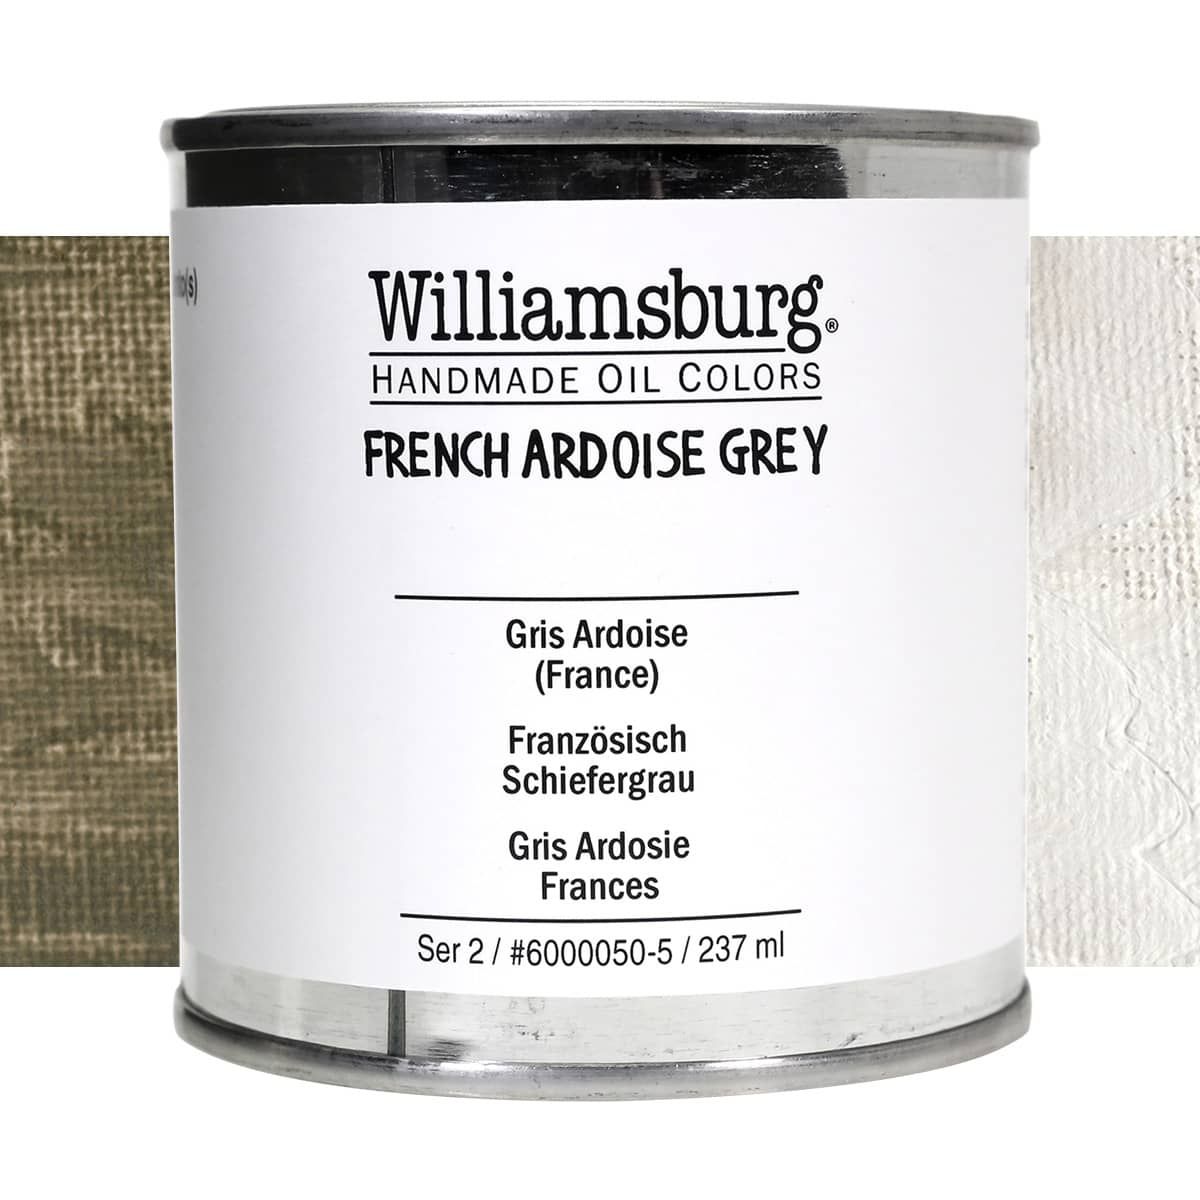 Williamsburg Oil Color 237 ml Can French Ardoise Grey